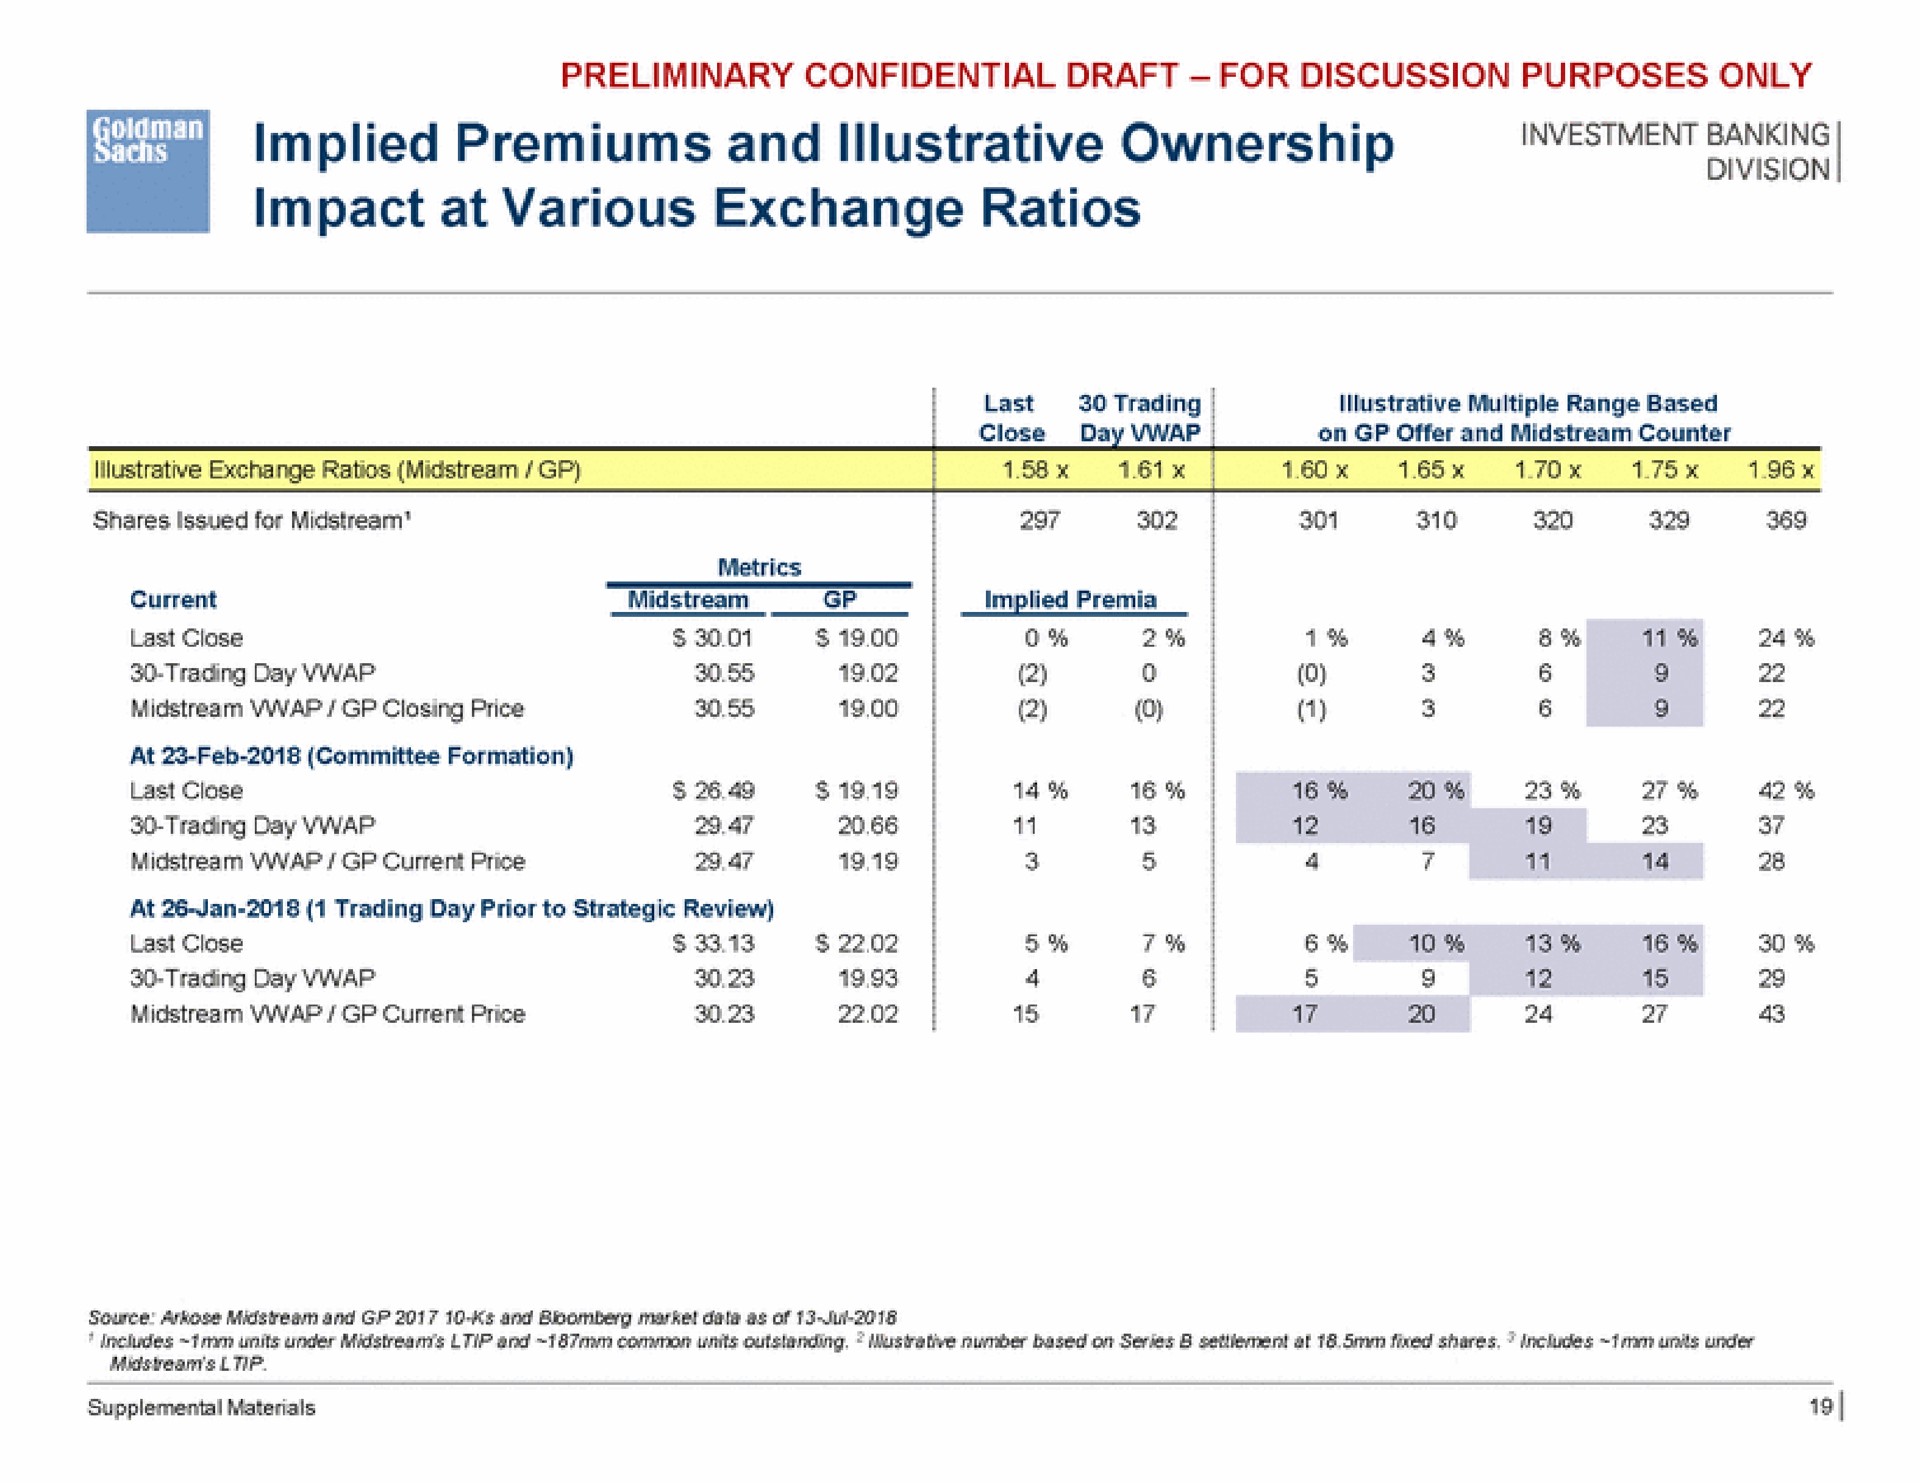 implied premiums and illustrative ownership oes impact at various exchange ratios | Goldman Sachs